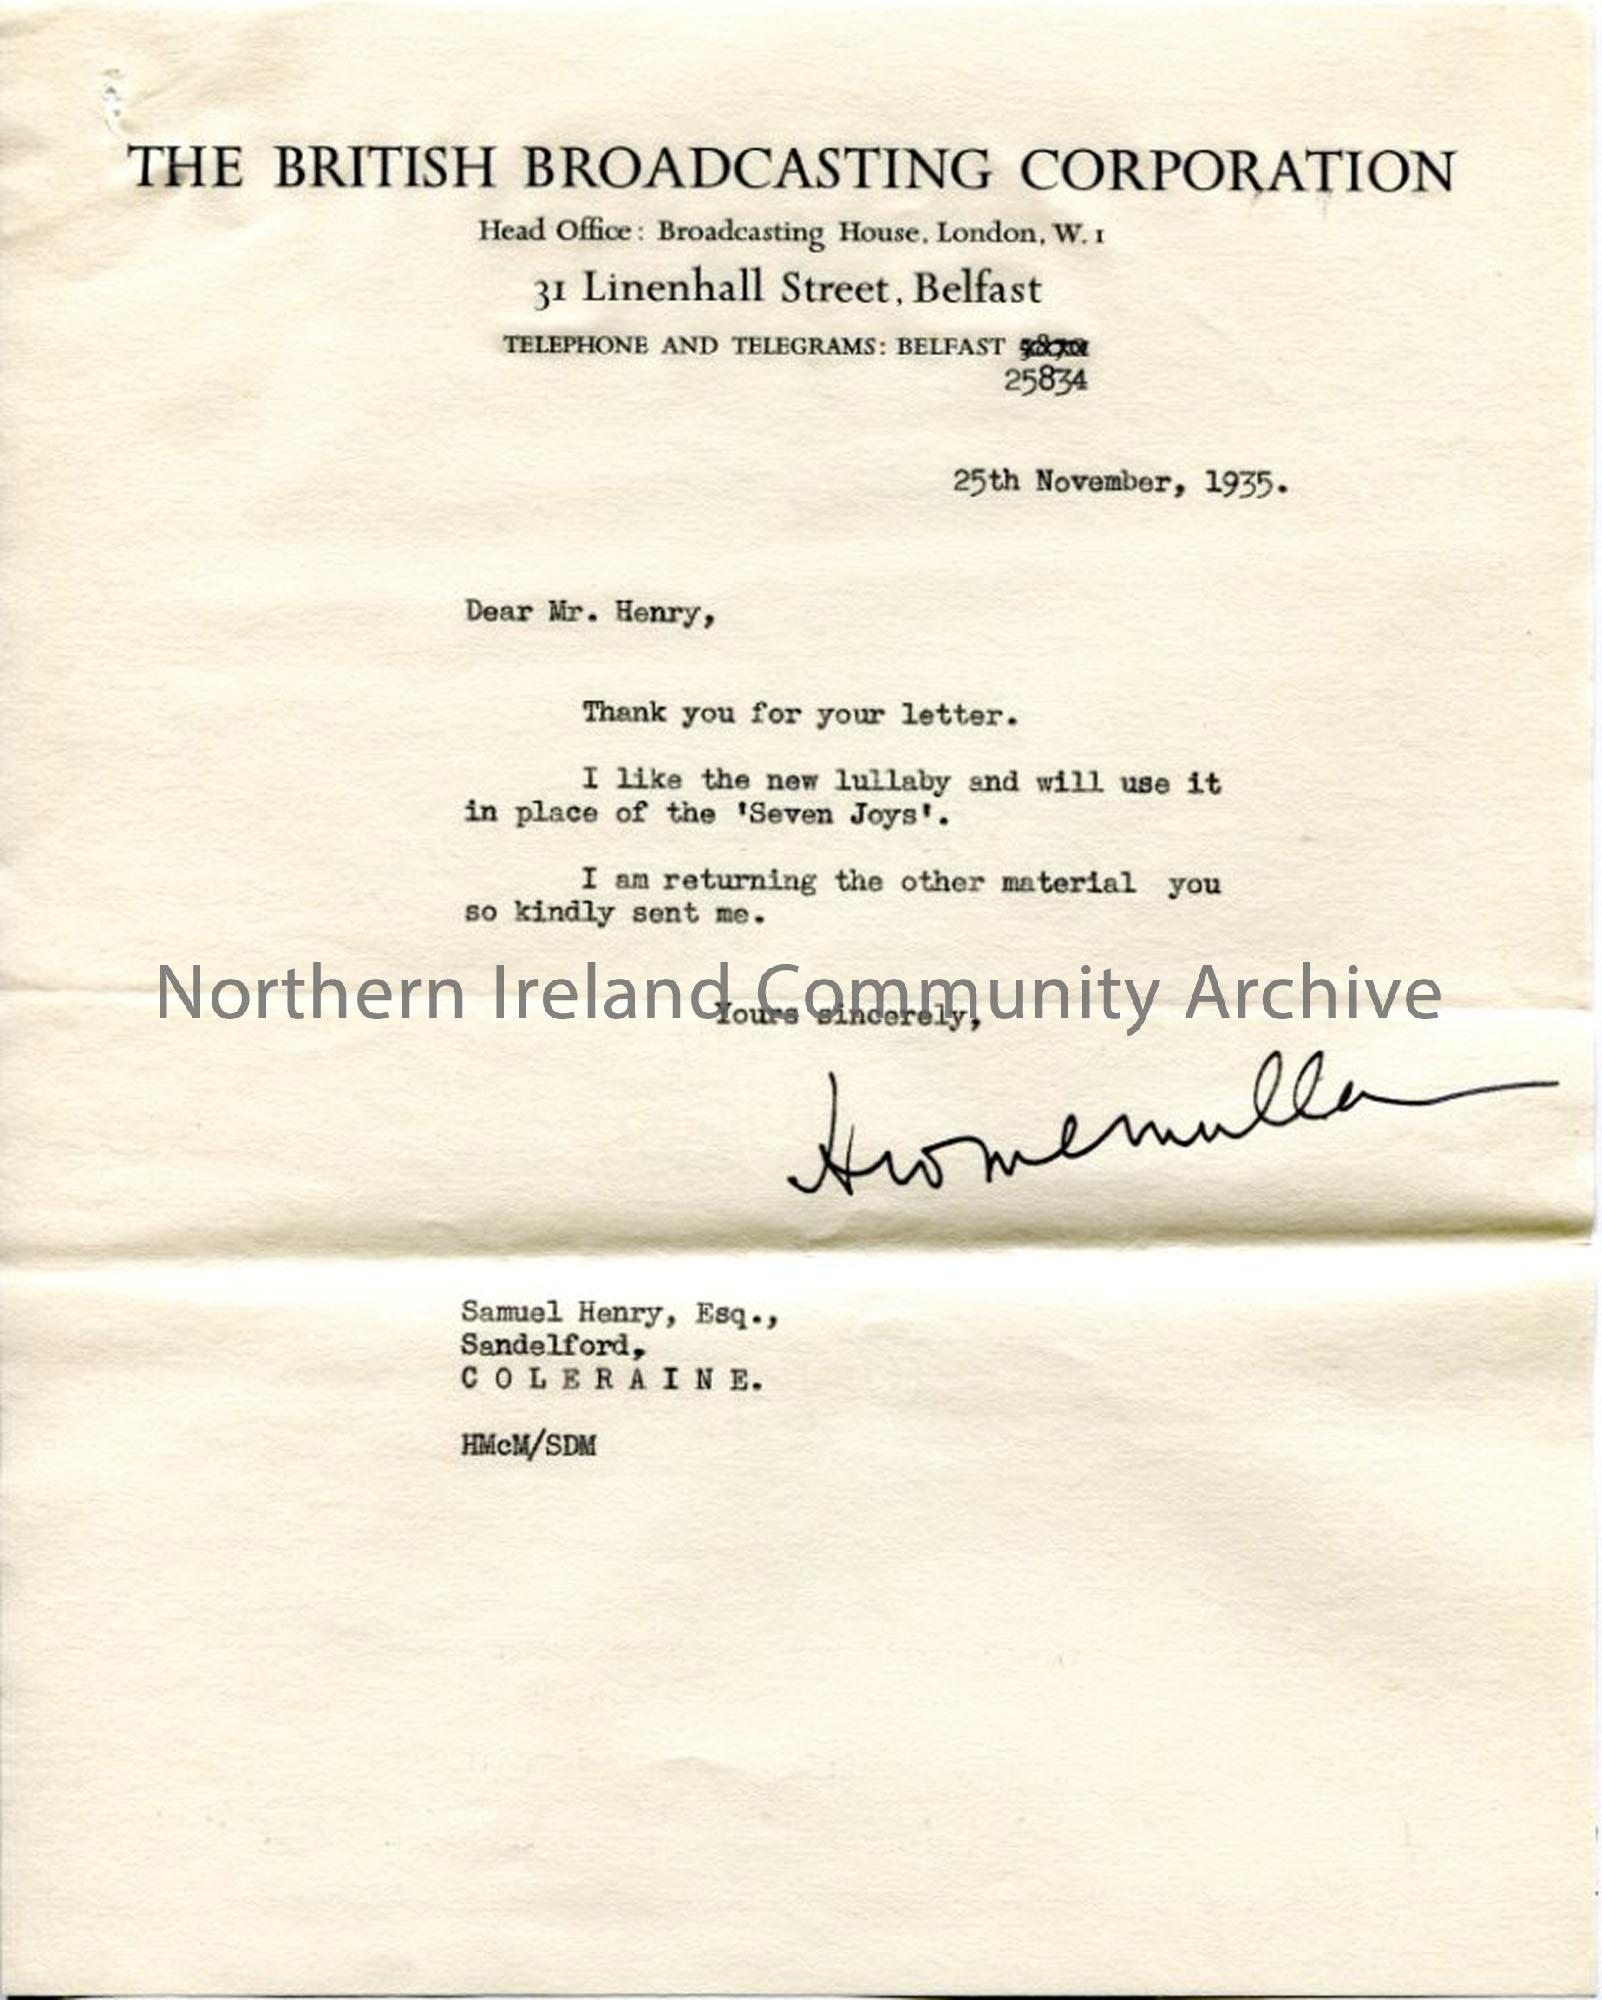 Letter from H W McMullan of the BBC, dated 25.11.1935